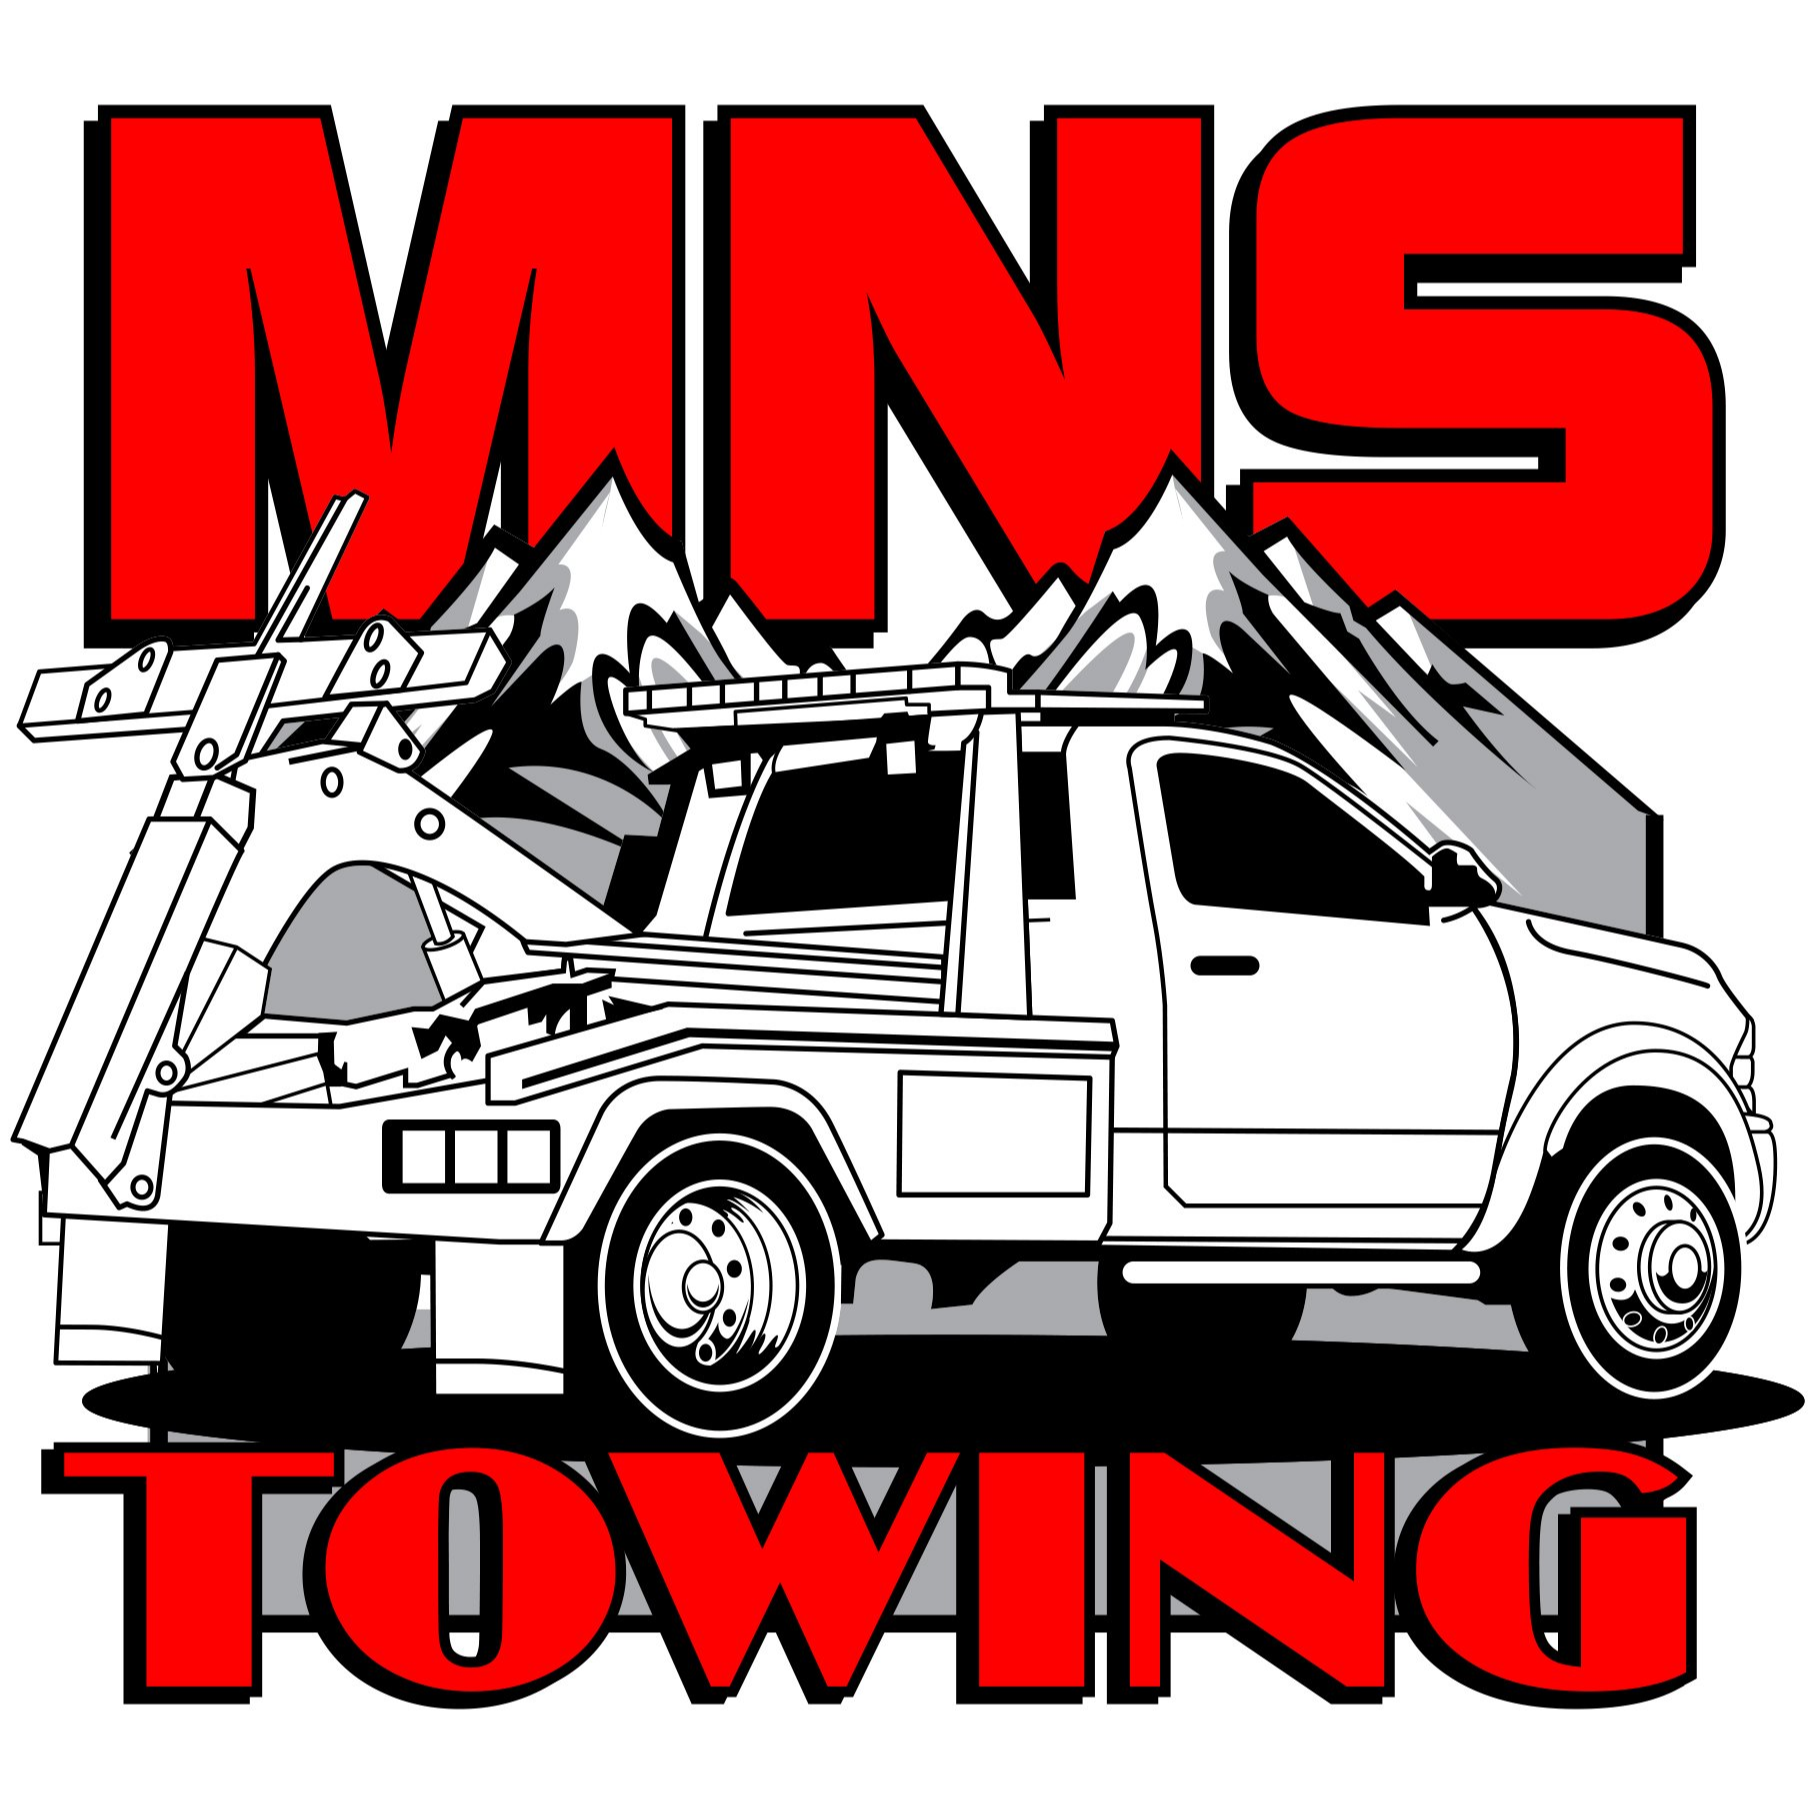 Call for reliable towing service! MNS Towing Colorado Springs (719)217-3304